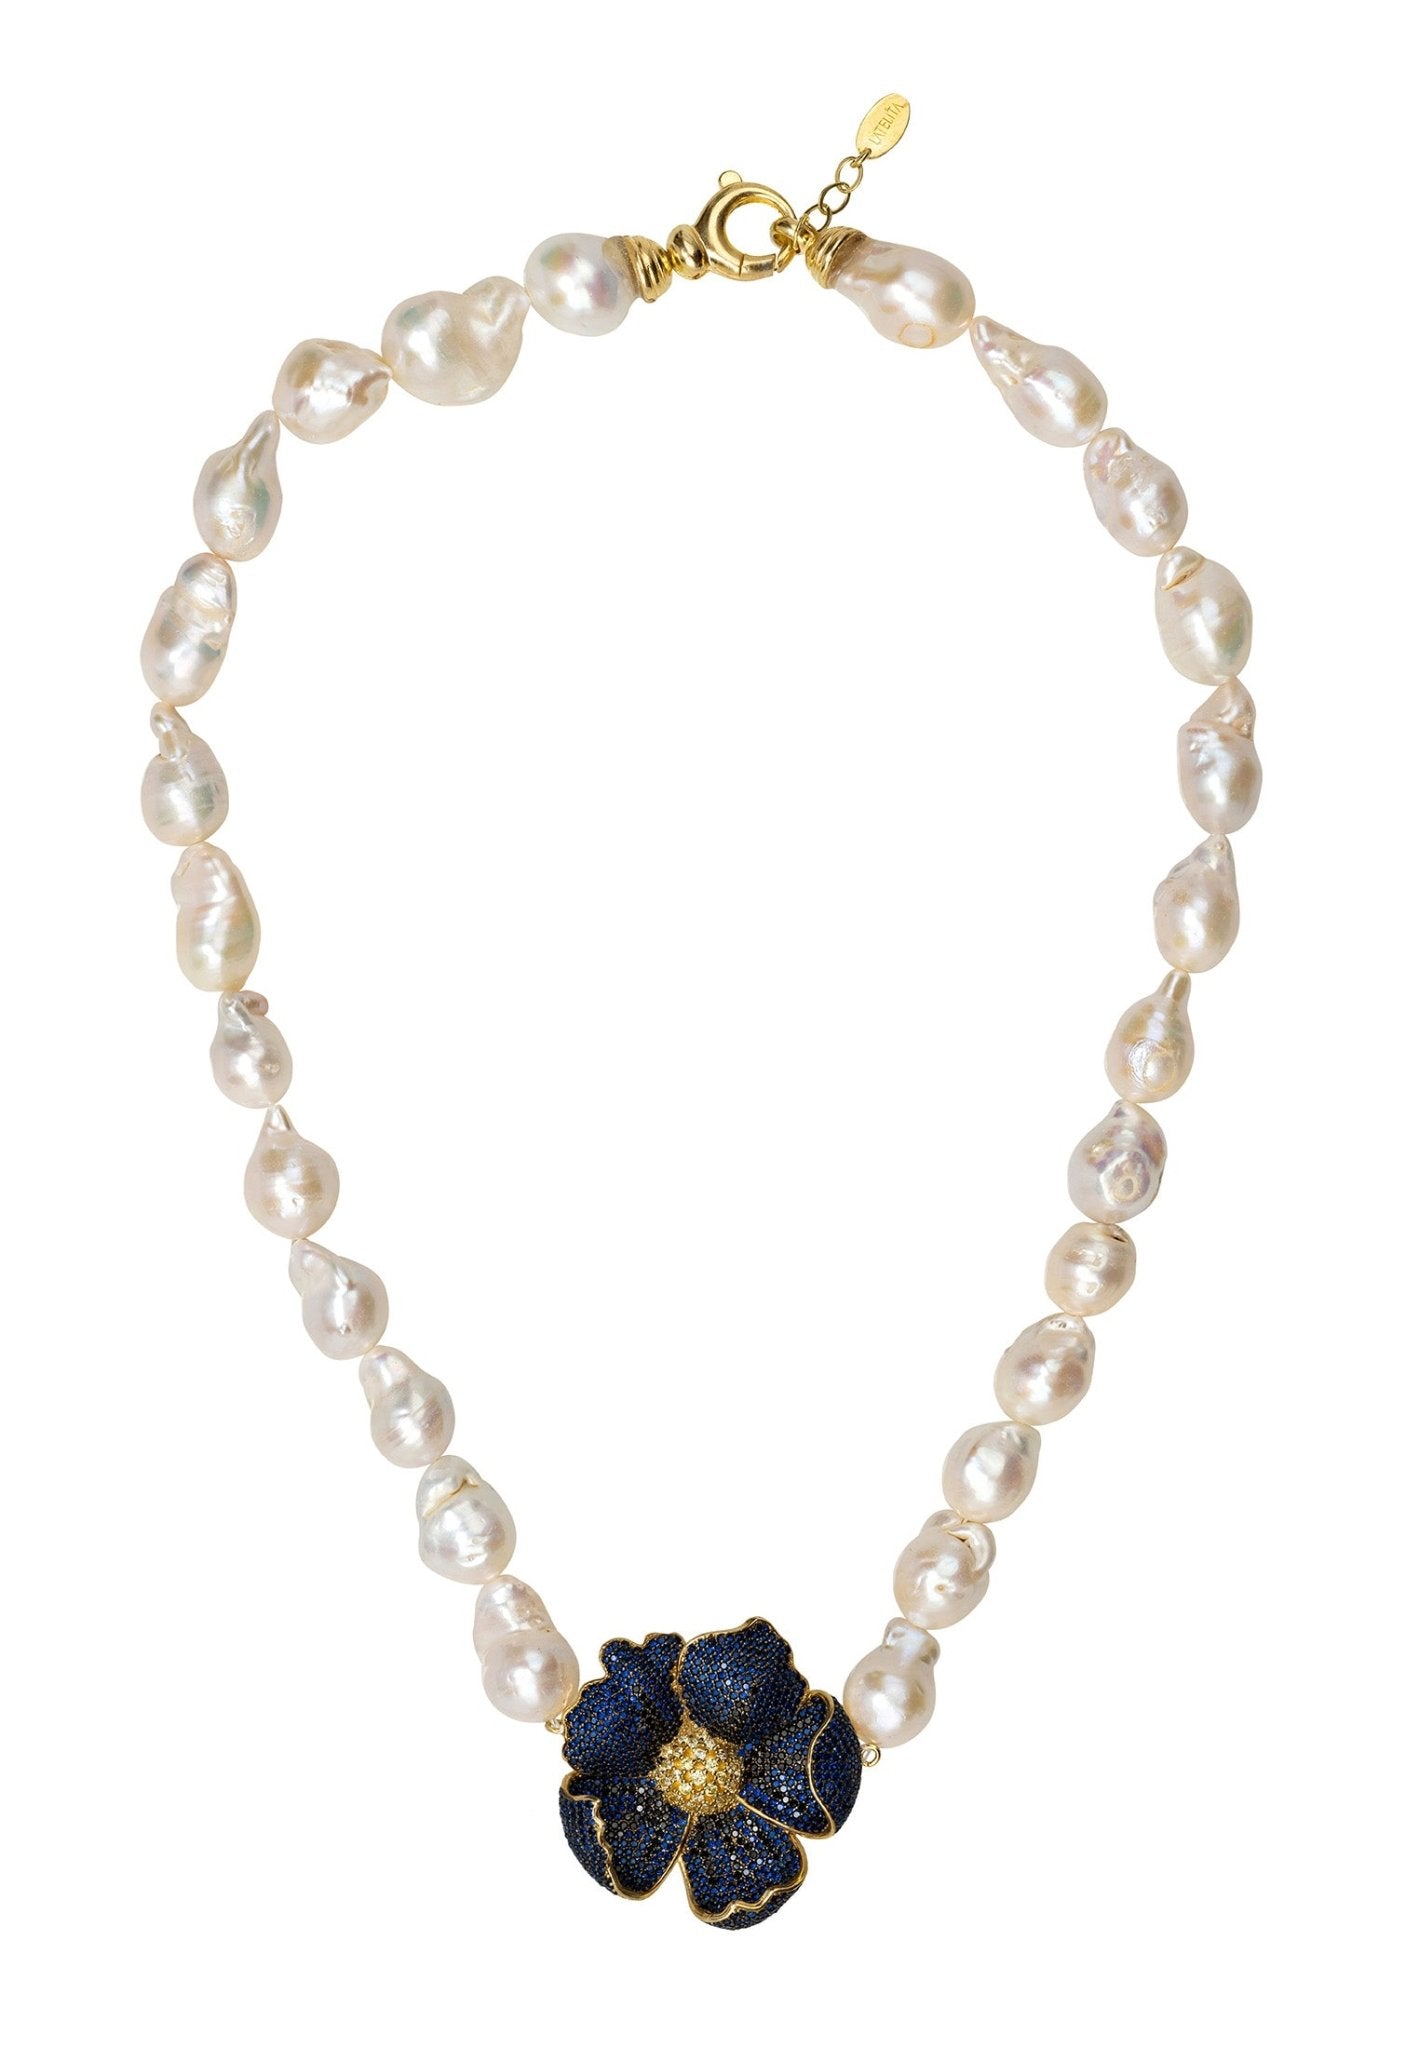 Poppy Flower Baroque Pearl Necklace Sapphire Blue Gold - LATELITA Necklaces